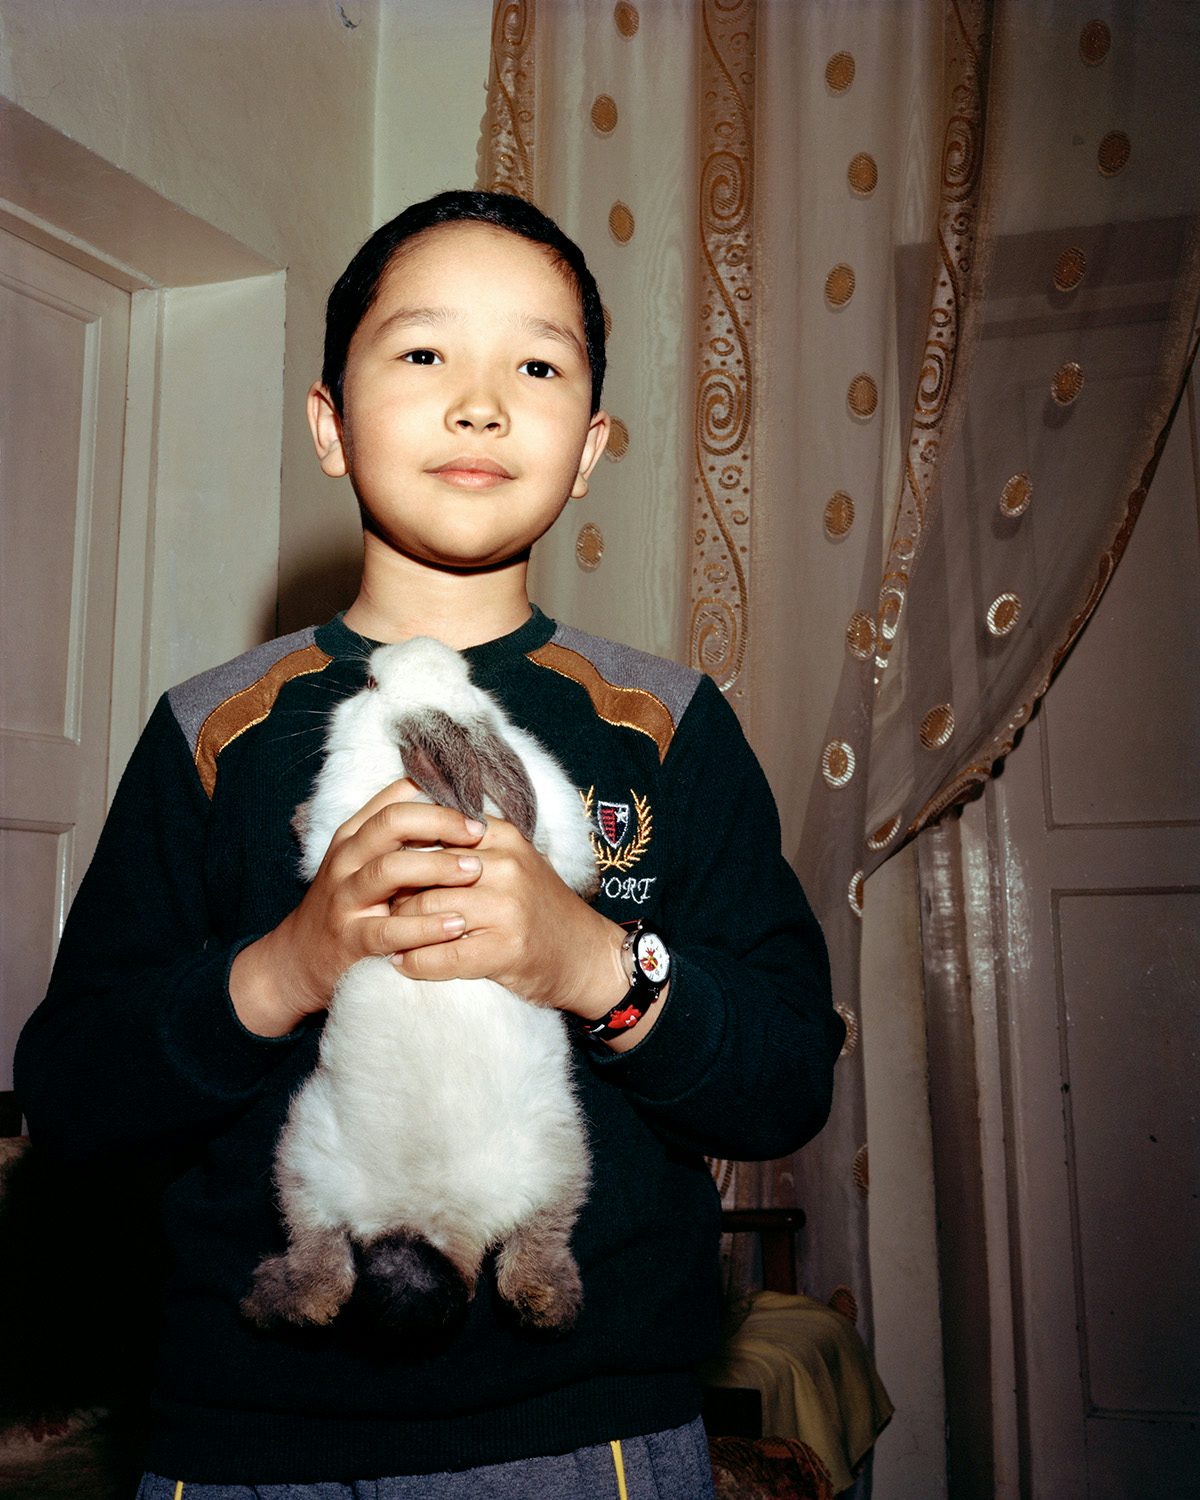 Image shows a young boy holding a rabbit to his chest, photographed by Taylor Wessing portrait prize runner-up, Alexander Komenda